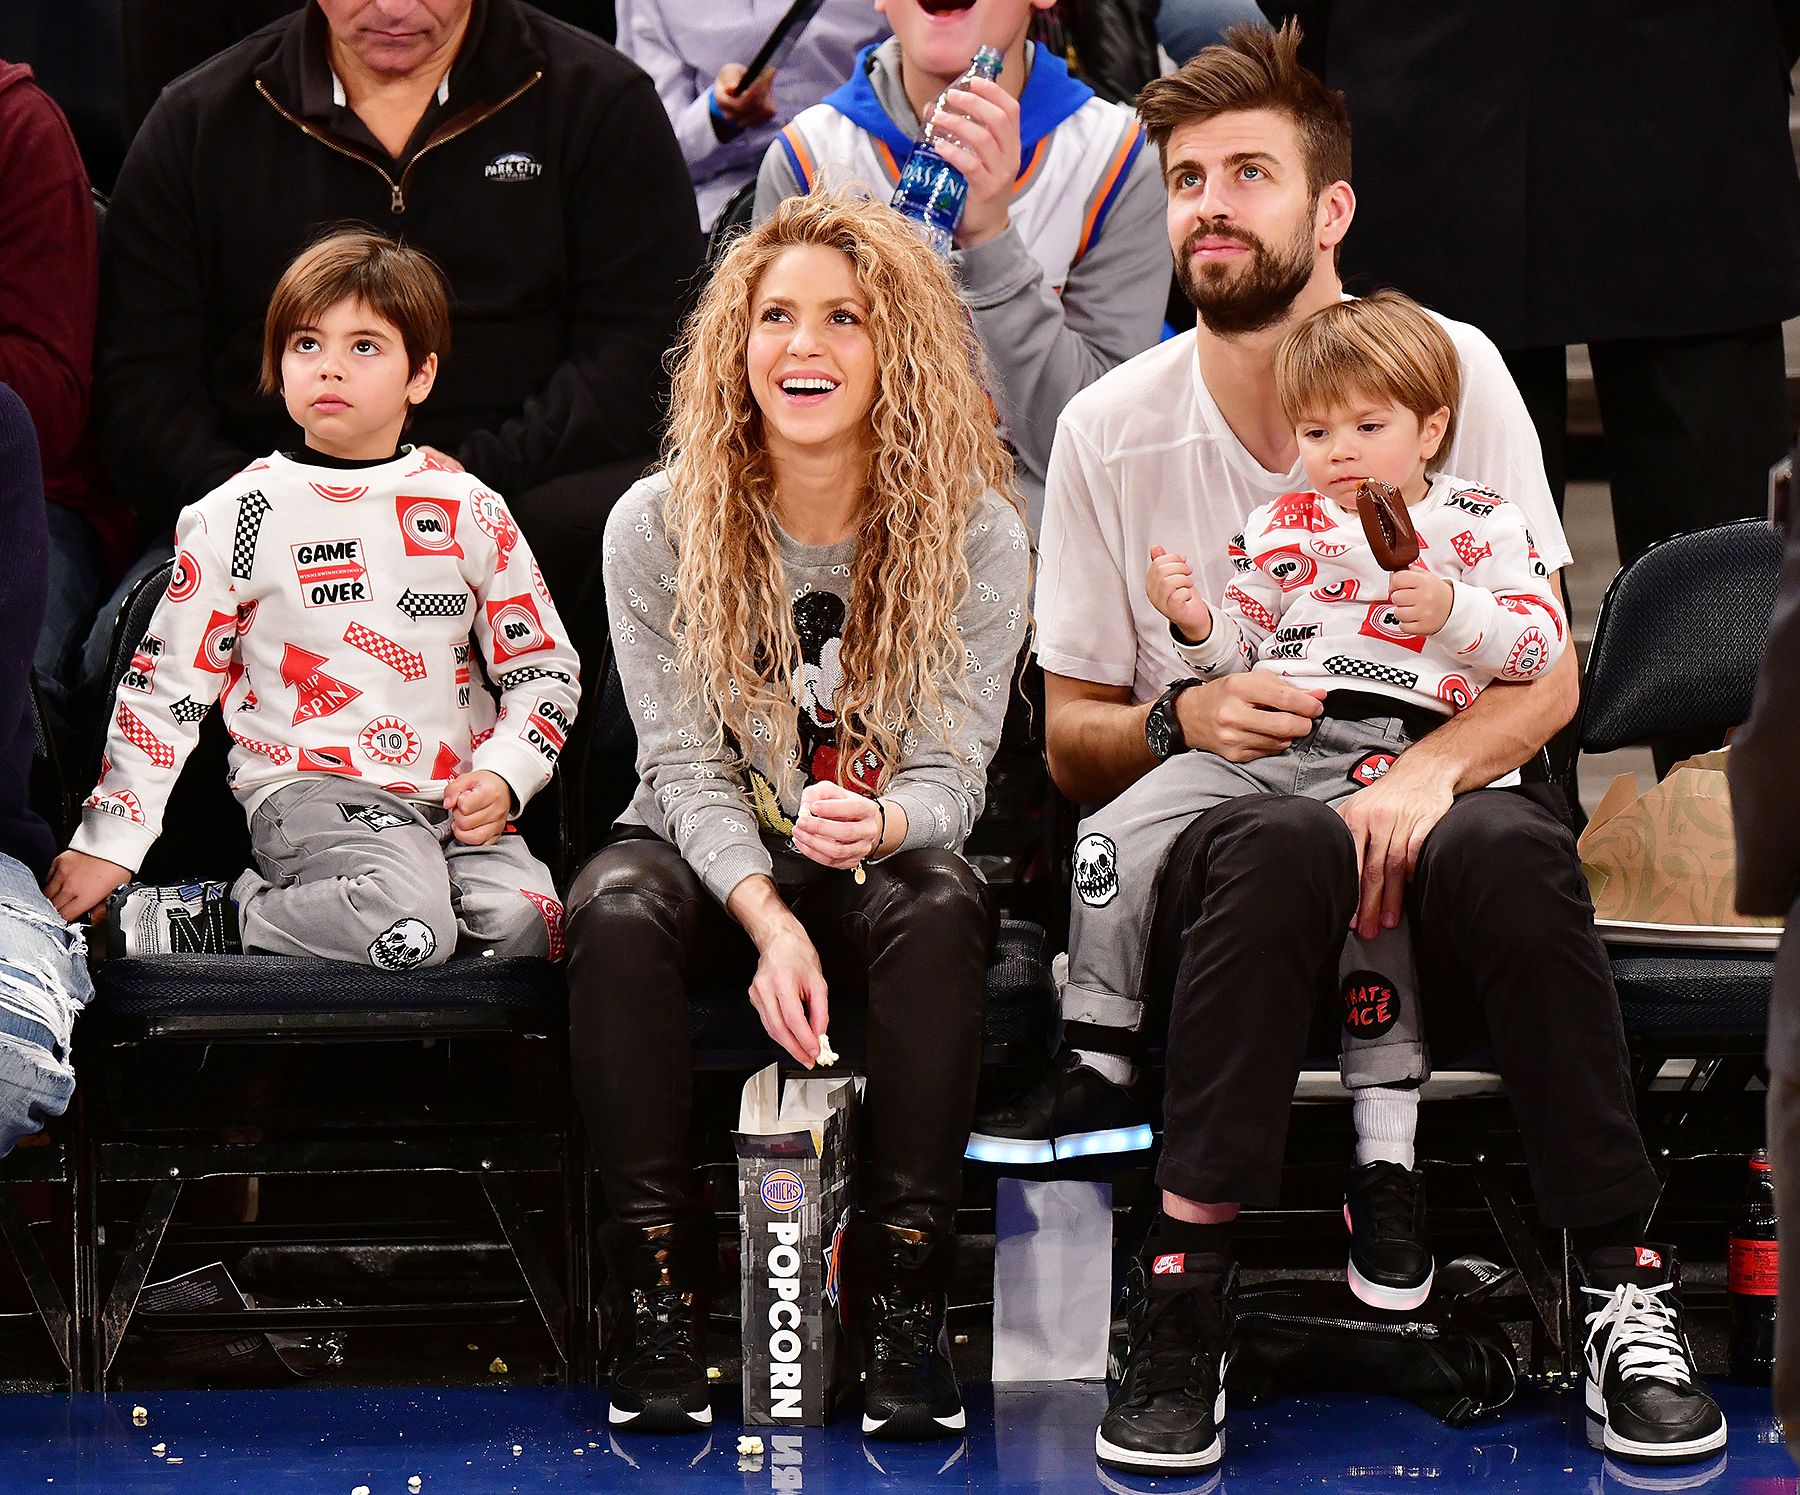 The ex-couple at a game, with their children.